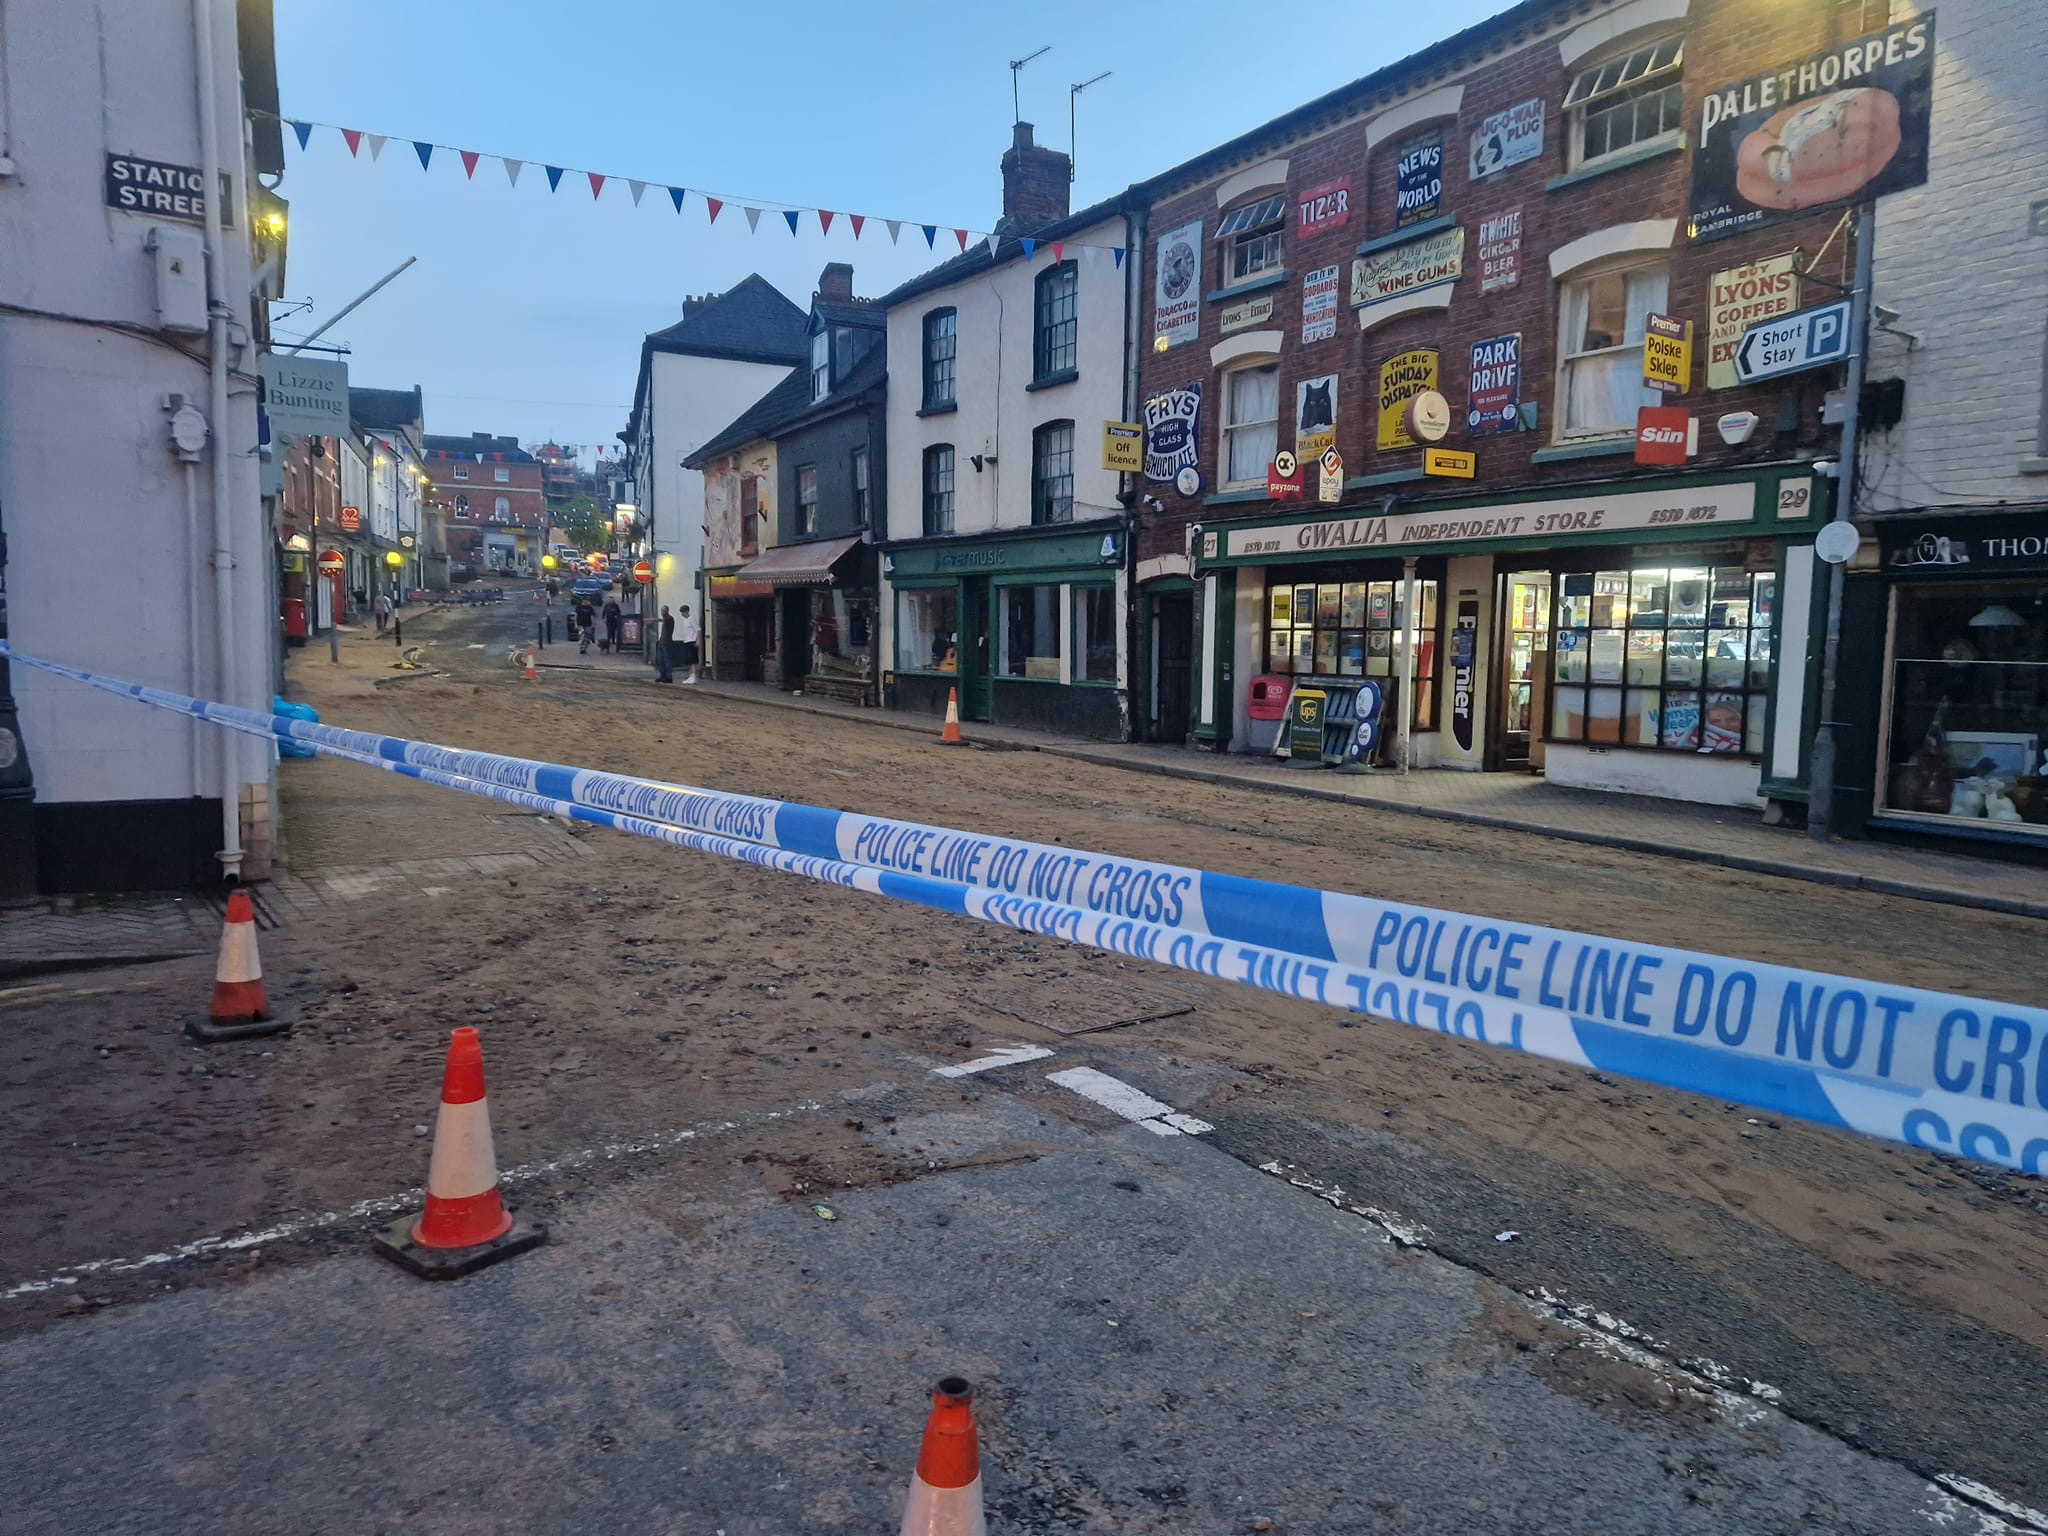 NEWS | Ross-on-Wye businesses react after storm damage and issues with underground pipes cause flash flooding and road closures in town centre 